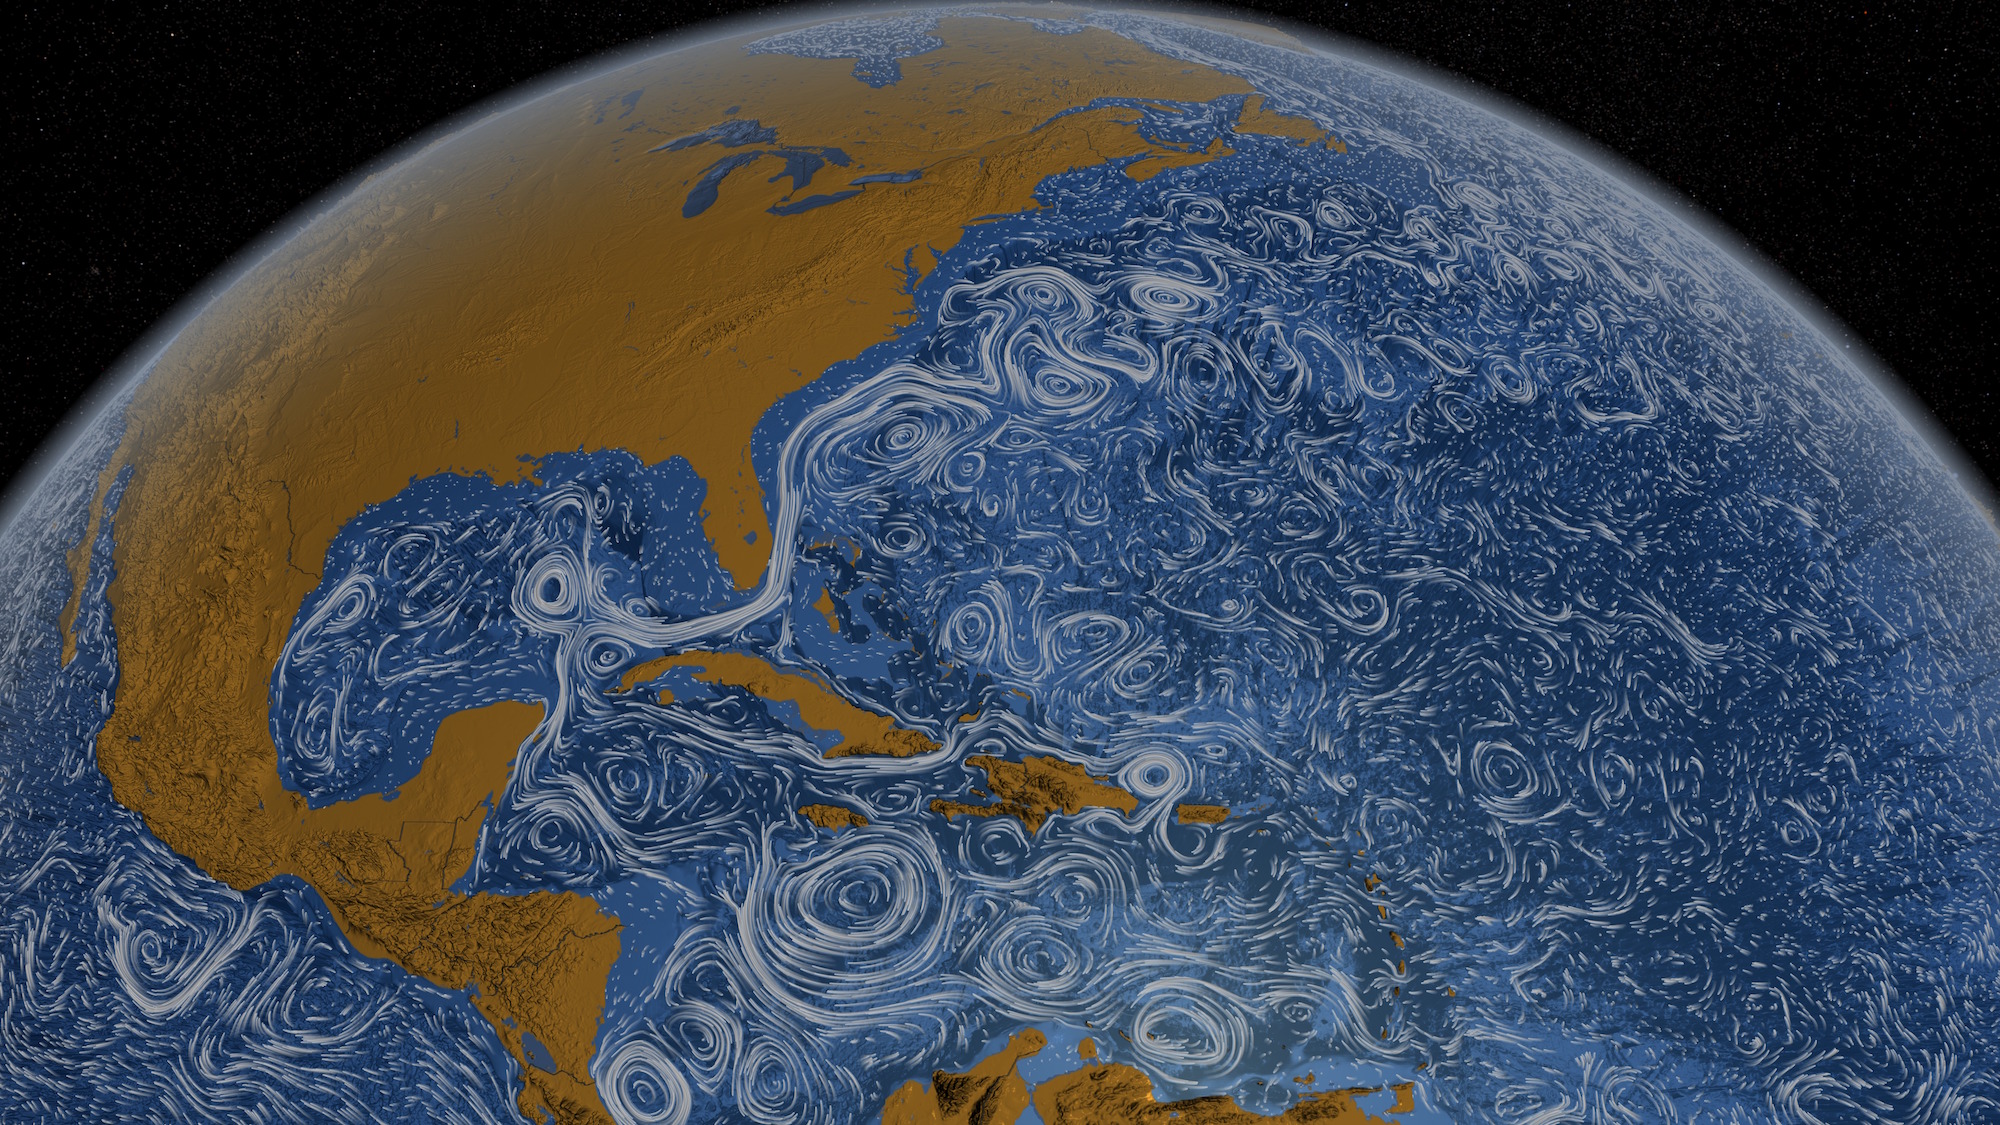 Modeling, Visualization and Prediction of "Ocean Weather"